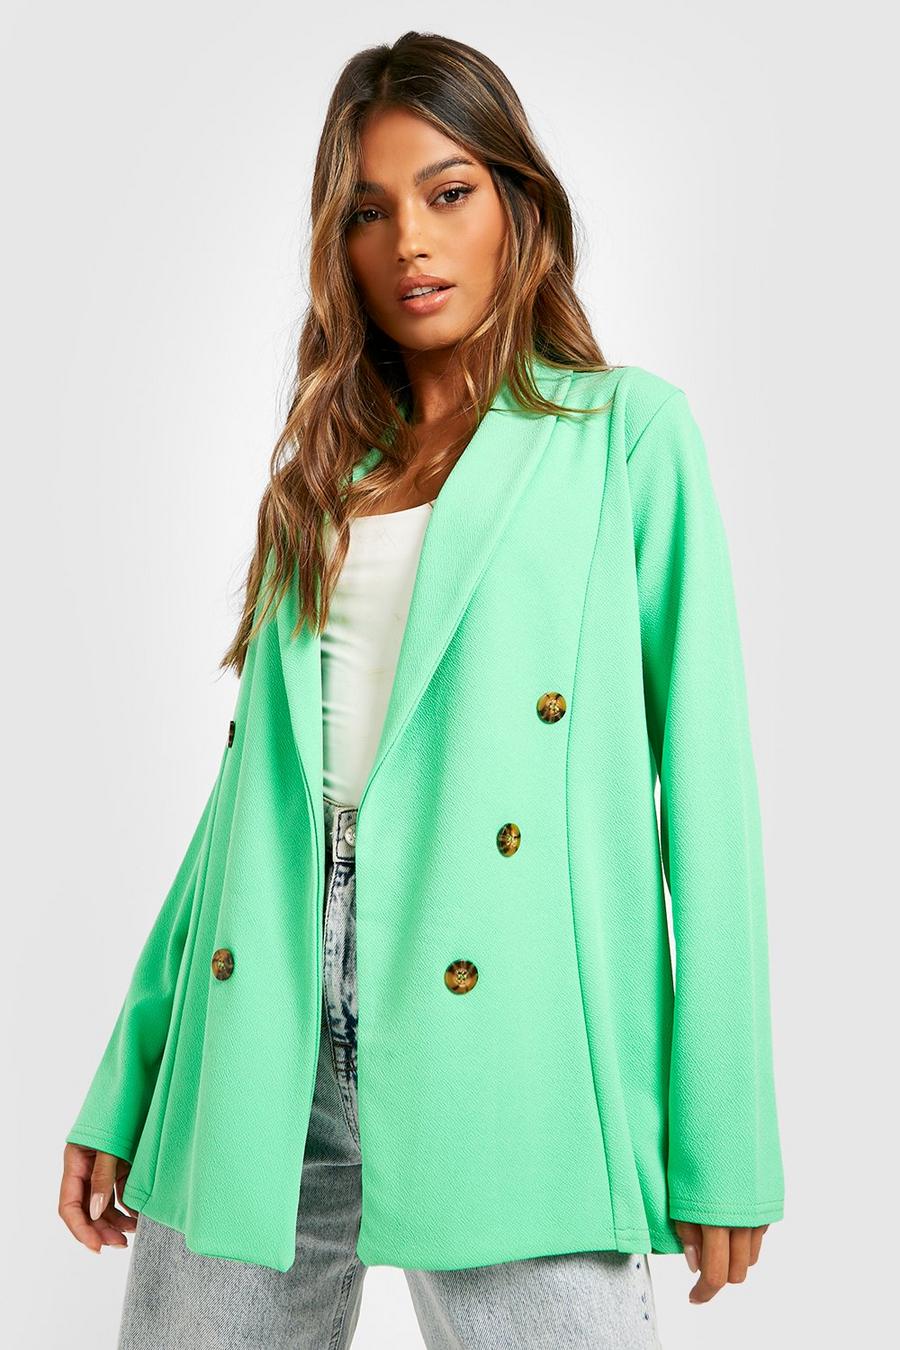 Bright green Basic Jersey Relaxed Fit Blazer